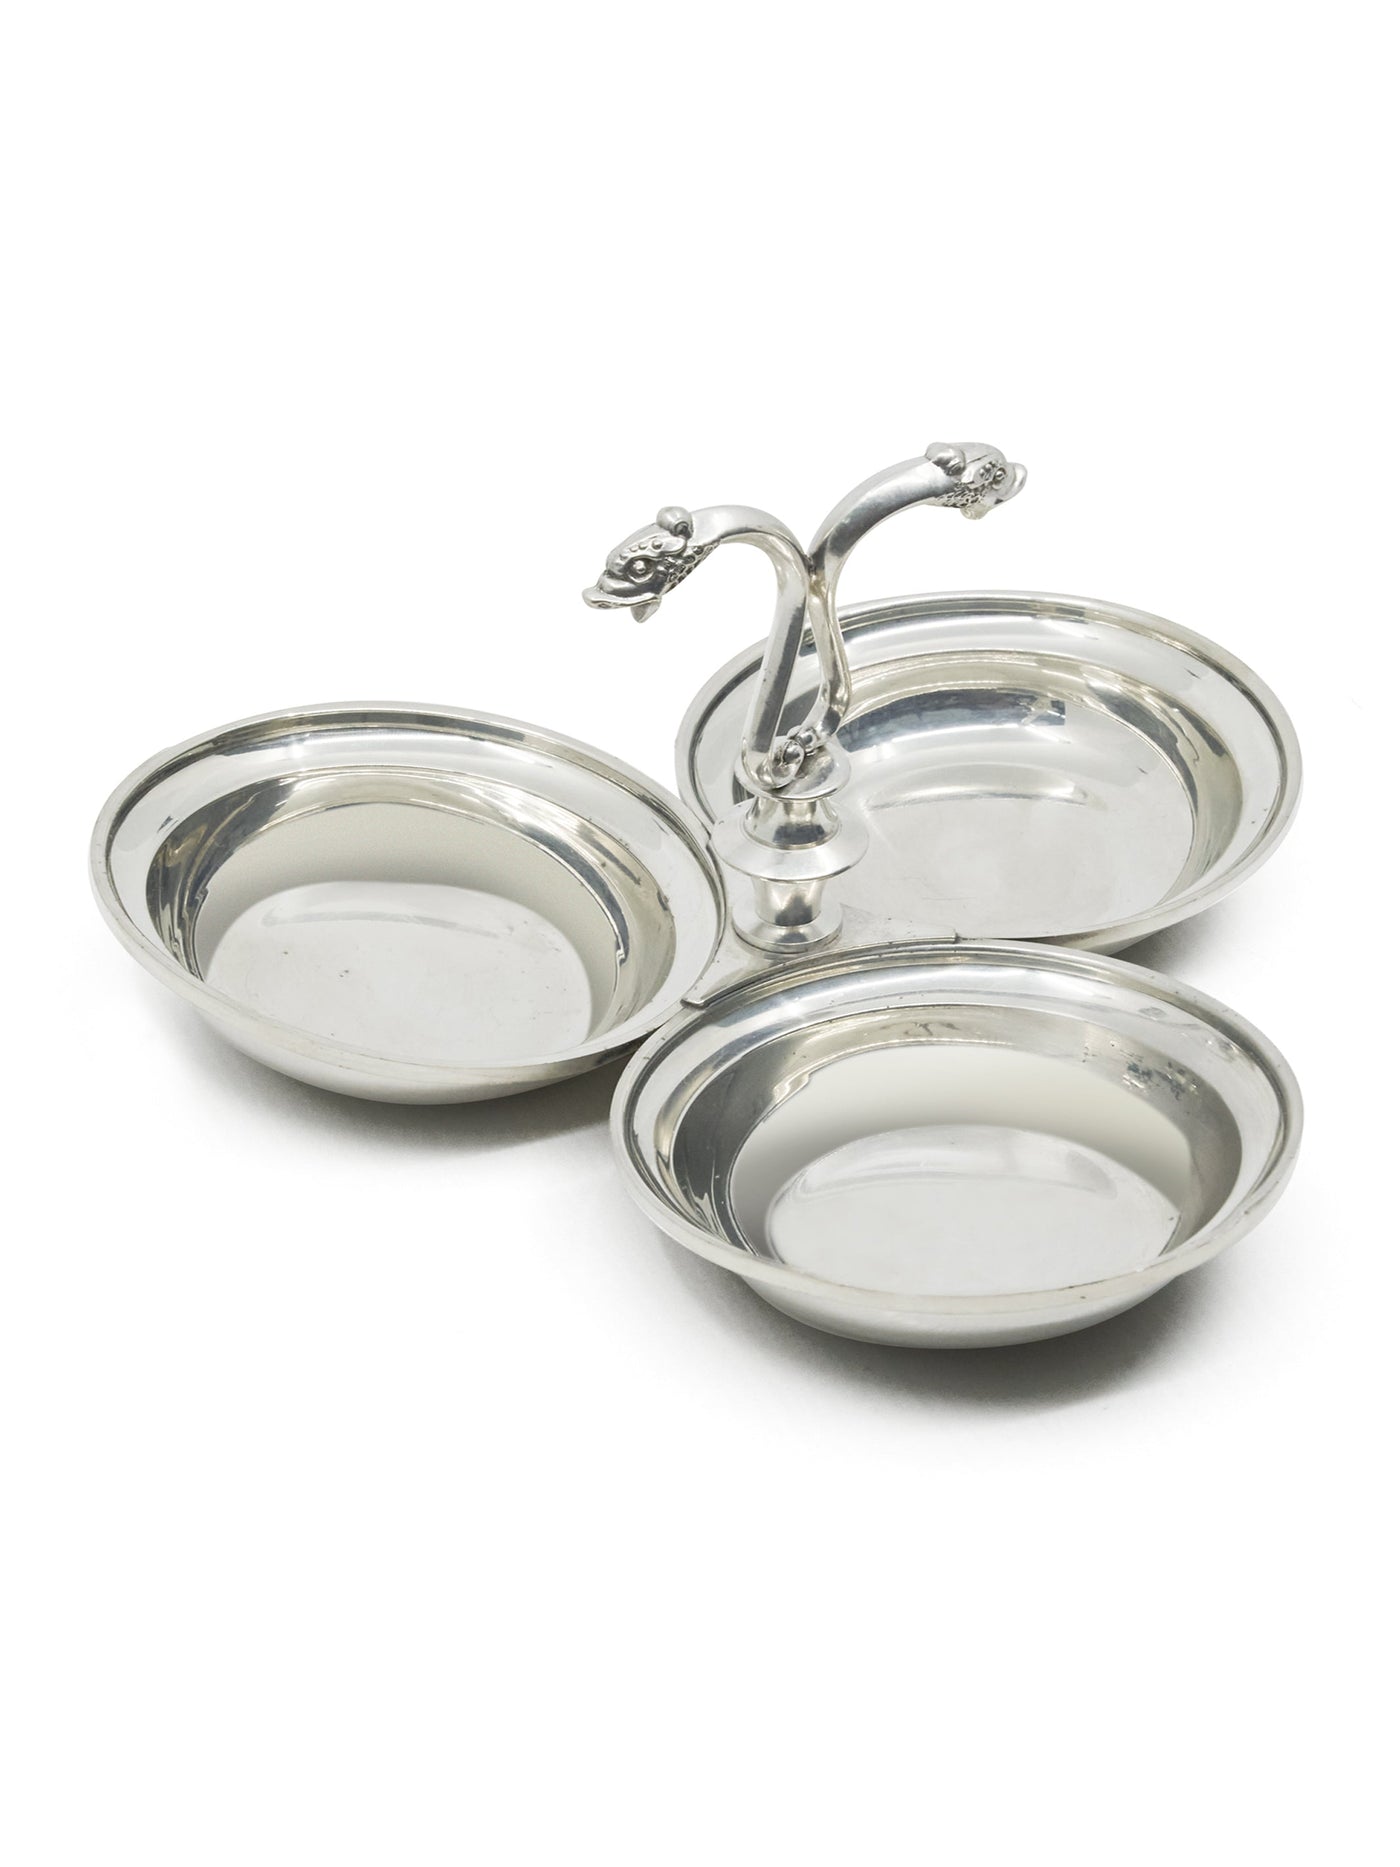 Silver Triple Bowl Server with Double Fish Head Handle